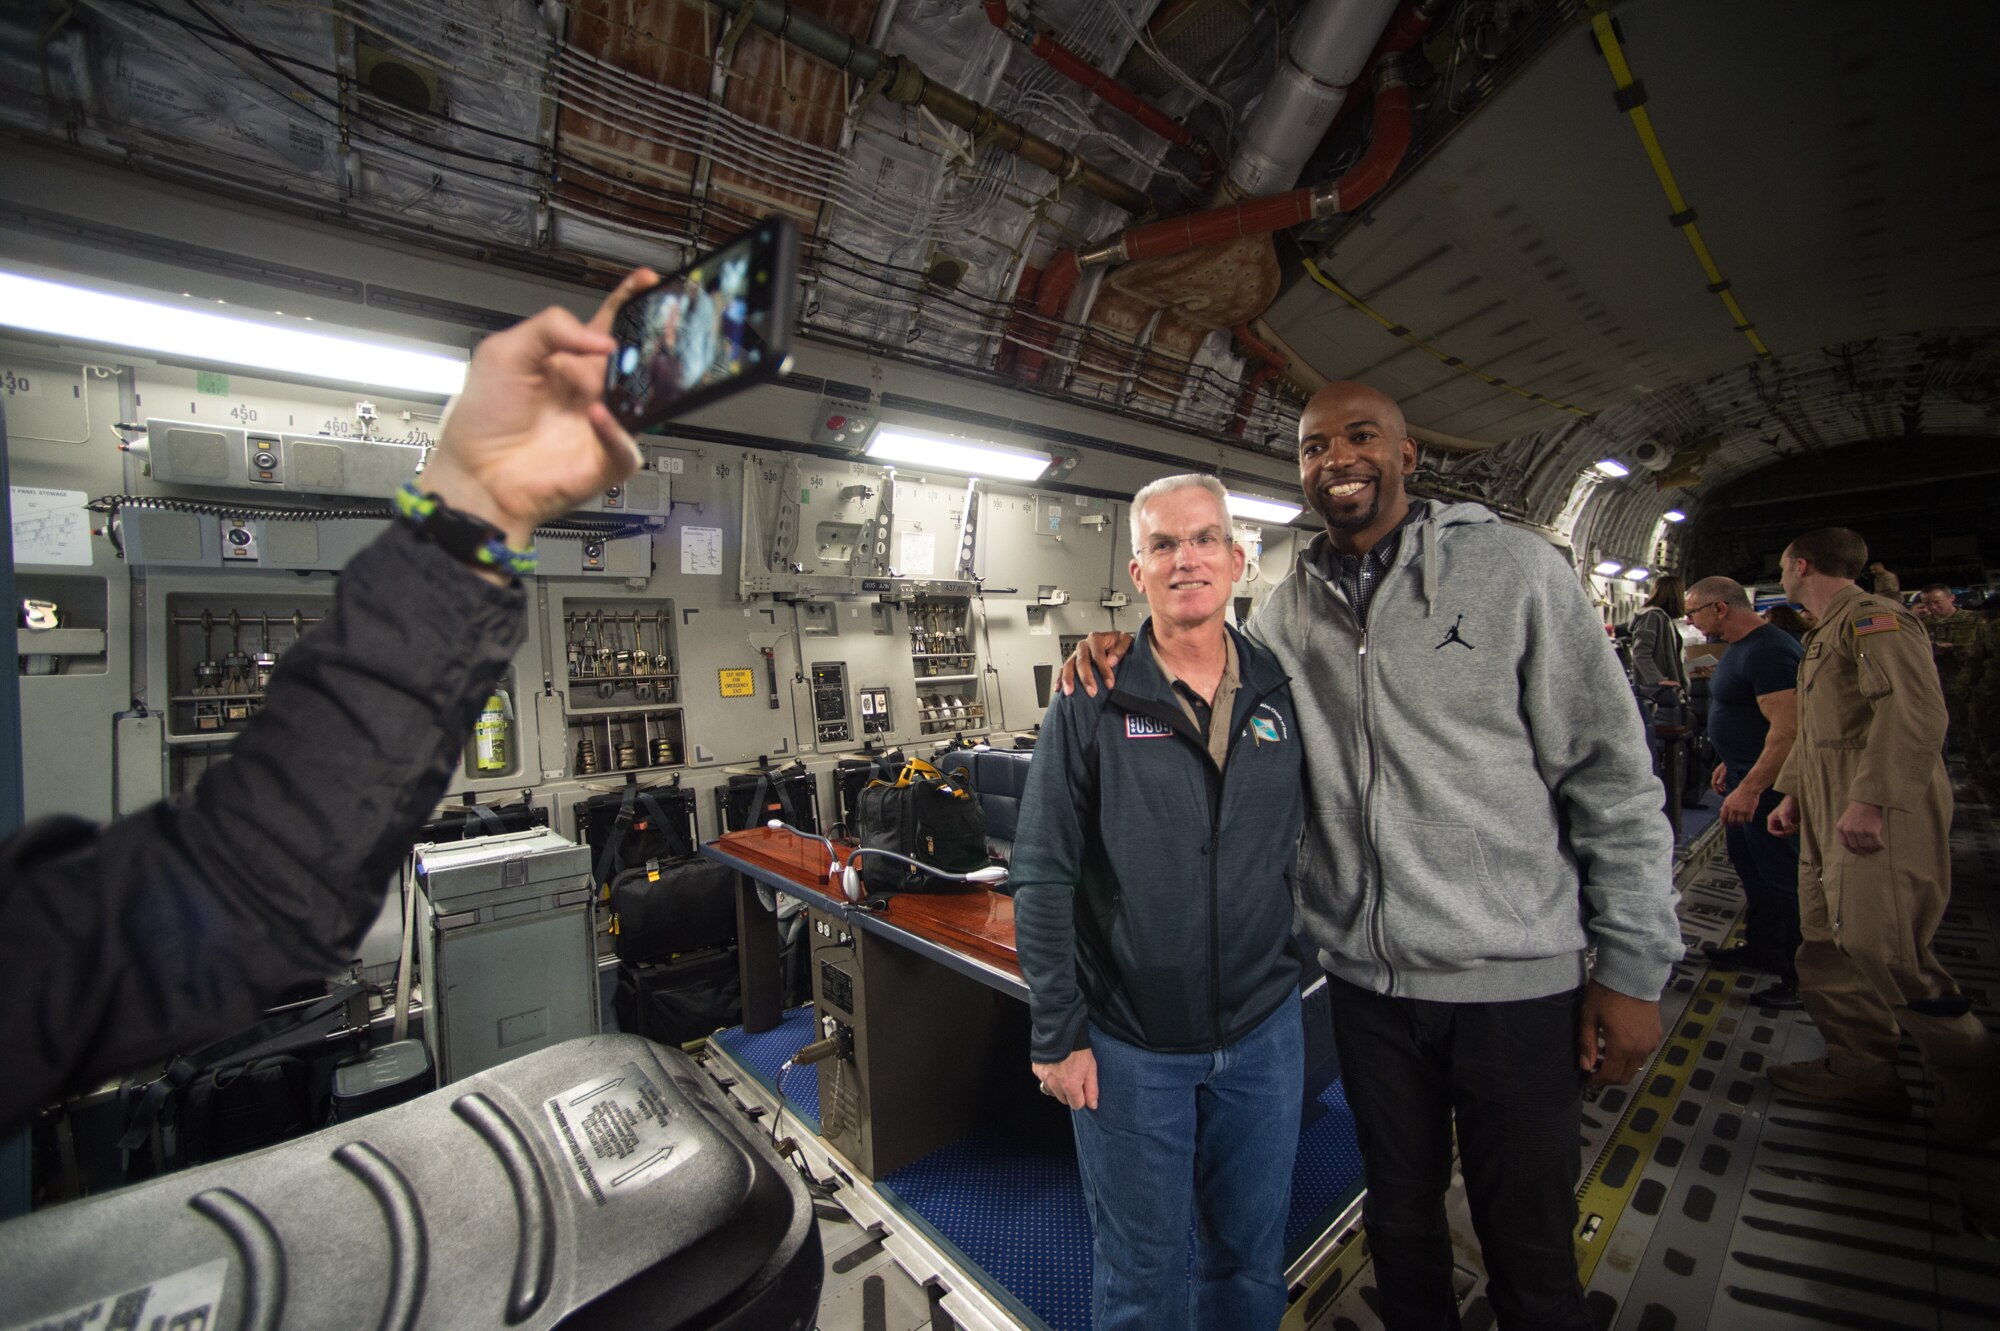 U.S. Air Force Gen. Paul J. Selva, Vice Chairman of the Joint Chiefs of Staff, poses for a photo with NBA Legend Richard "Rip" Hamilton board a C-17 aircraft before departing on the annual Vice Chairman's USO Tour, April 20, 2018 at Joint Base Andrews, Md. Comedian Jon Stewart, country music artist Craig Morgan, celebrity chef Robert Irvine, professional fighters Max Holloway and Paige VanZant, and NBA Legend Richard "Rip" Hamilton will join Gen. Selva on a tour across the world as they visit service members overseas to thank them for their service and sacrifice.